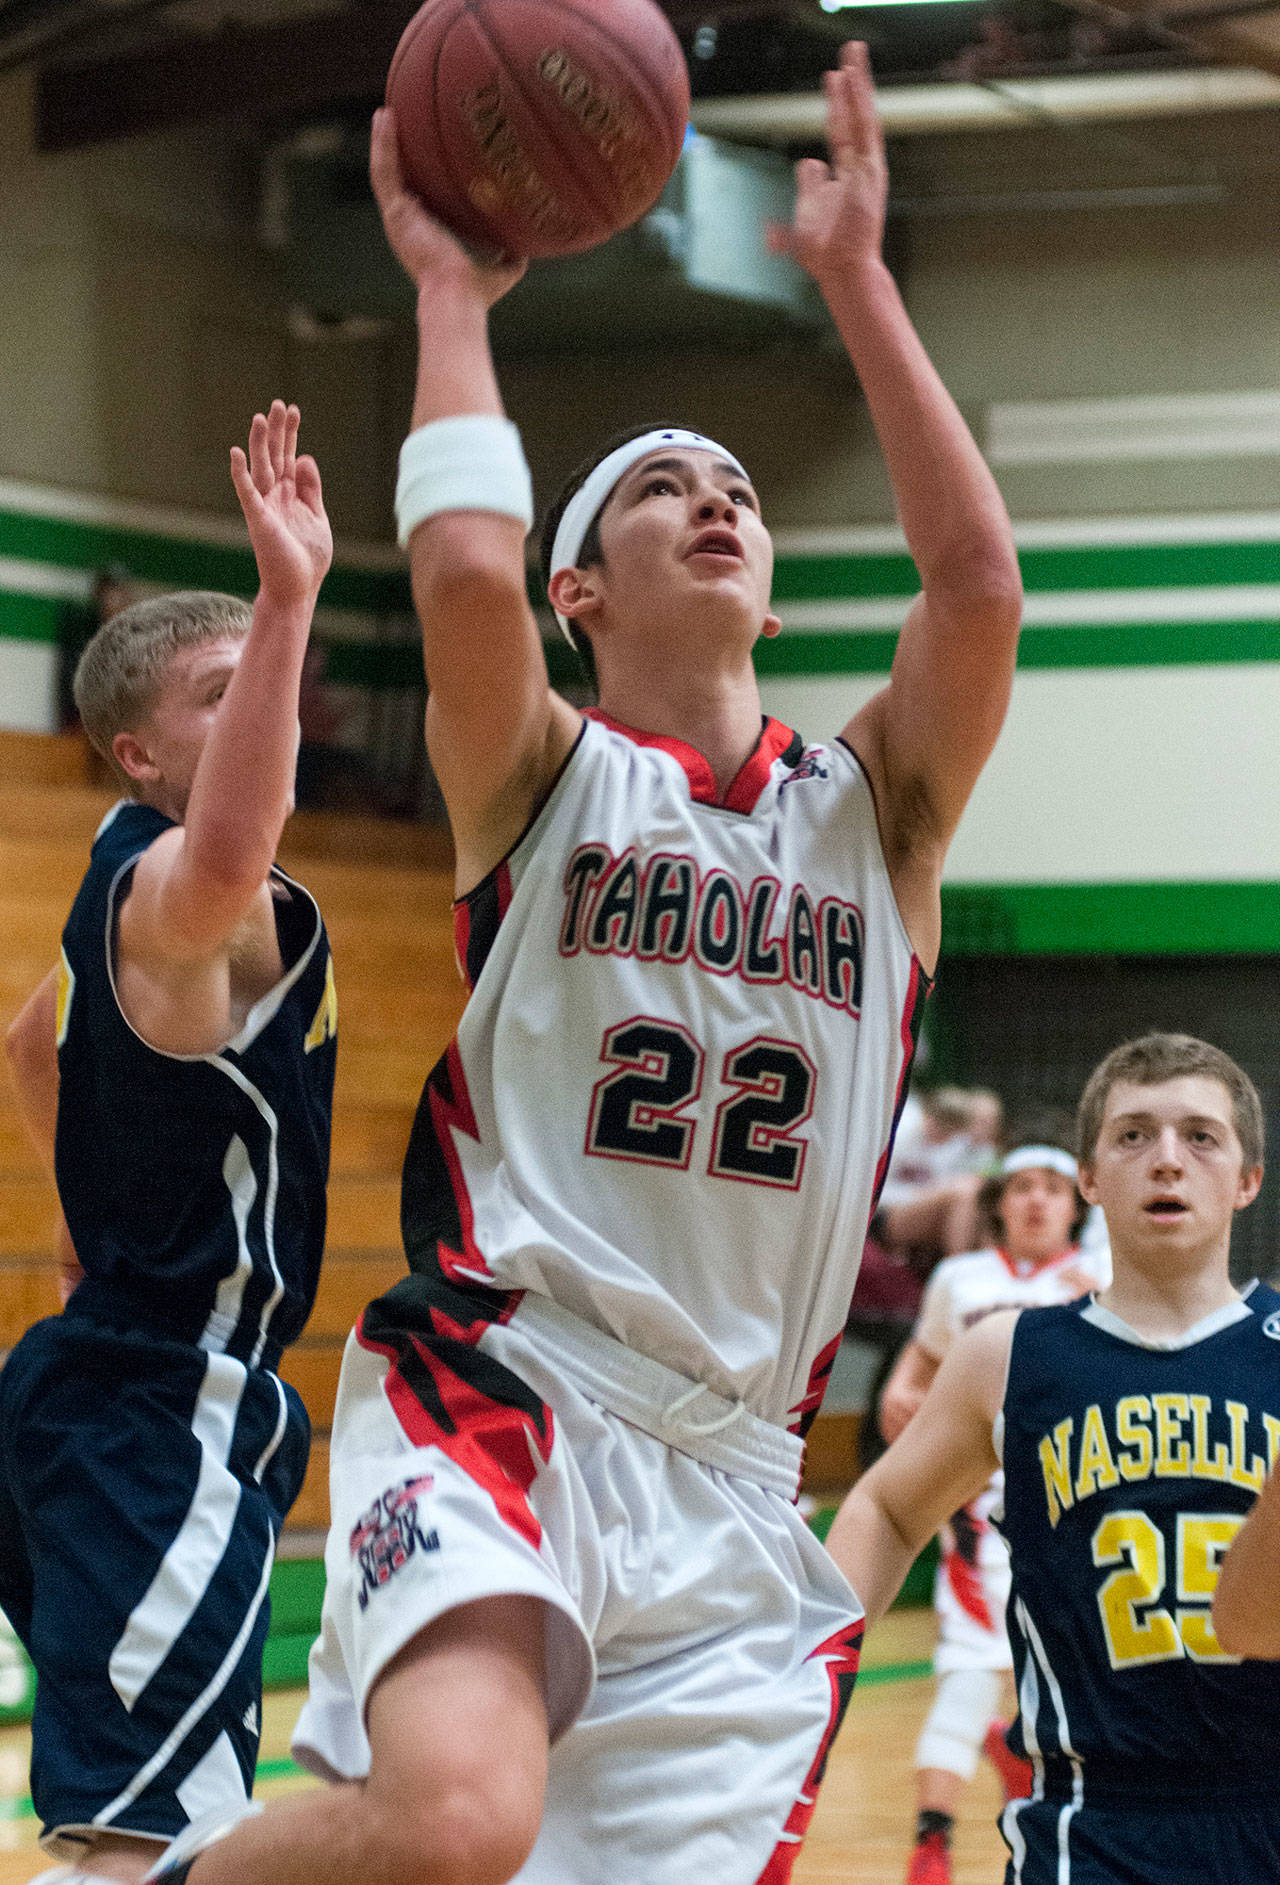 (Brendan Carl | The Daily World) Taholah’s Zach Cain and his teammates are heading back to the state 1B boys basketball tournament today at Spokane. Taholah, along with Raymond’s girls, Montesano’s girls and Hoquiam’s boys, are all in loser-out opening-round games in Spokane and Yakima.